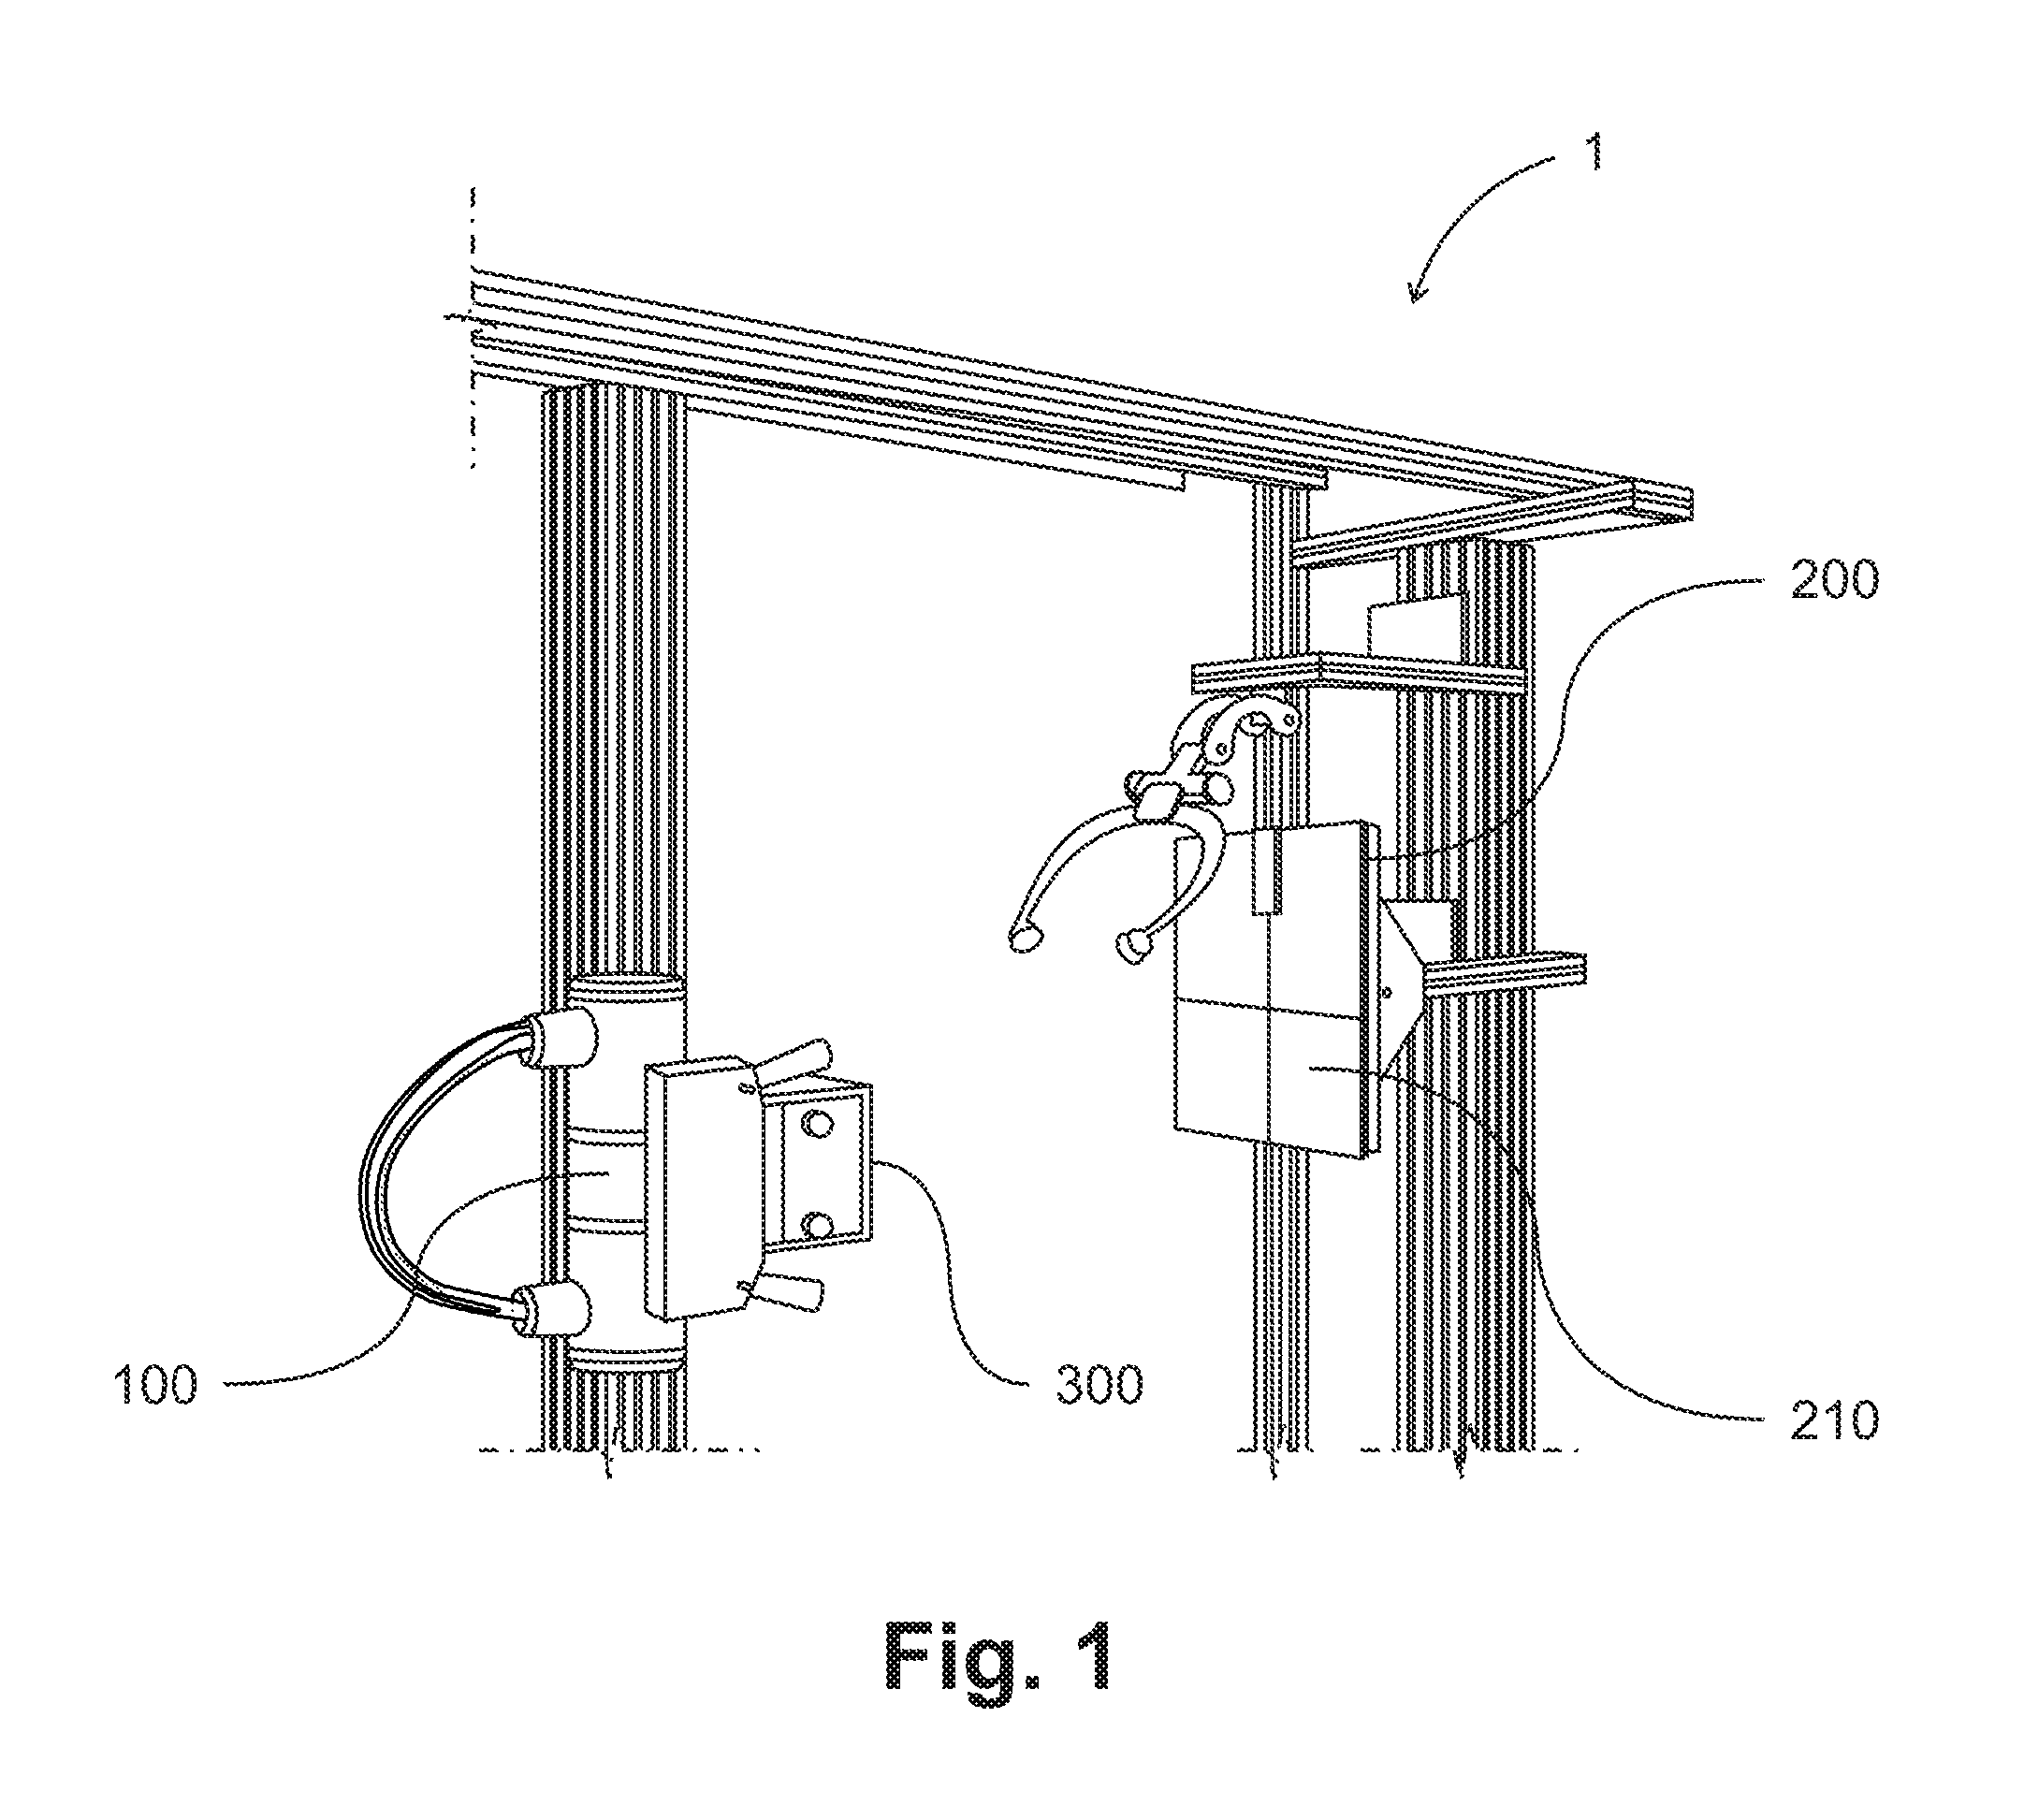 Laser guided patient positioning system for chiropractic x-rays and method of use